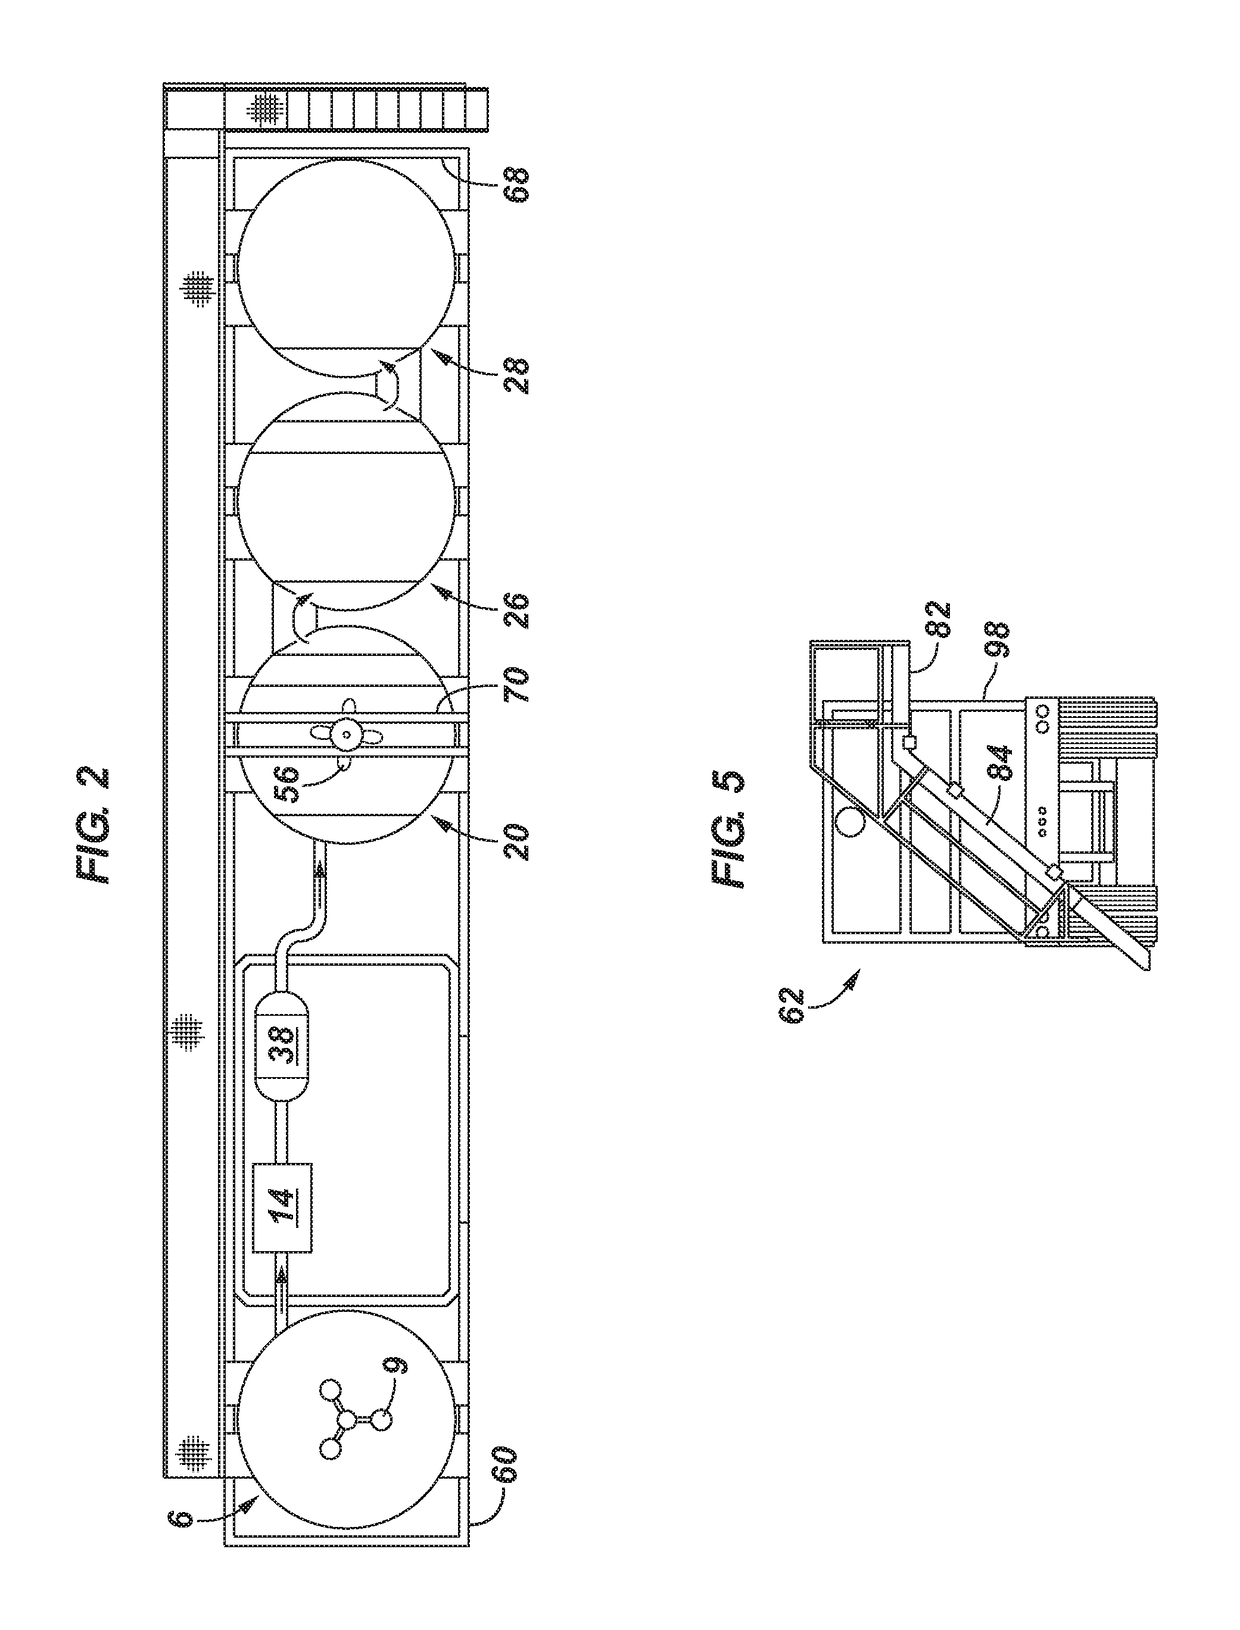 Method and apparatus for treating production water